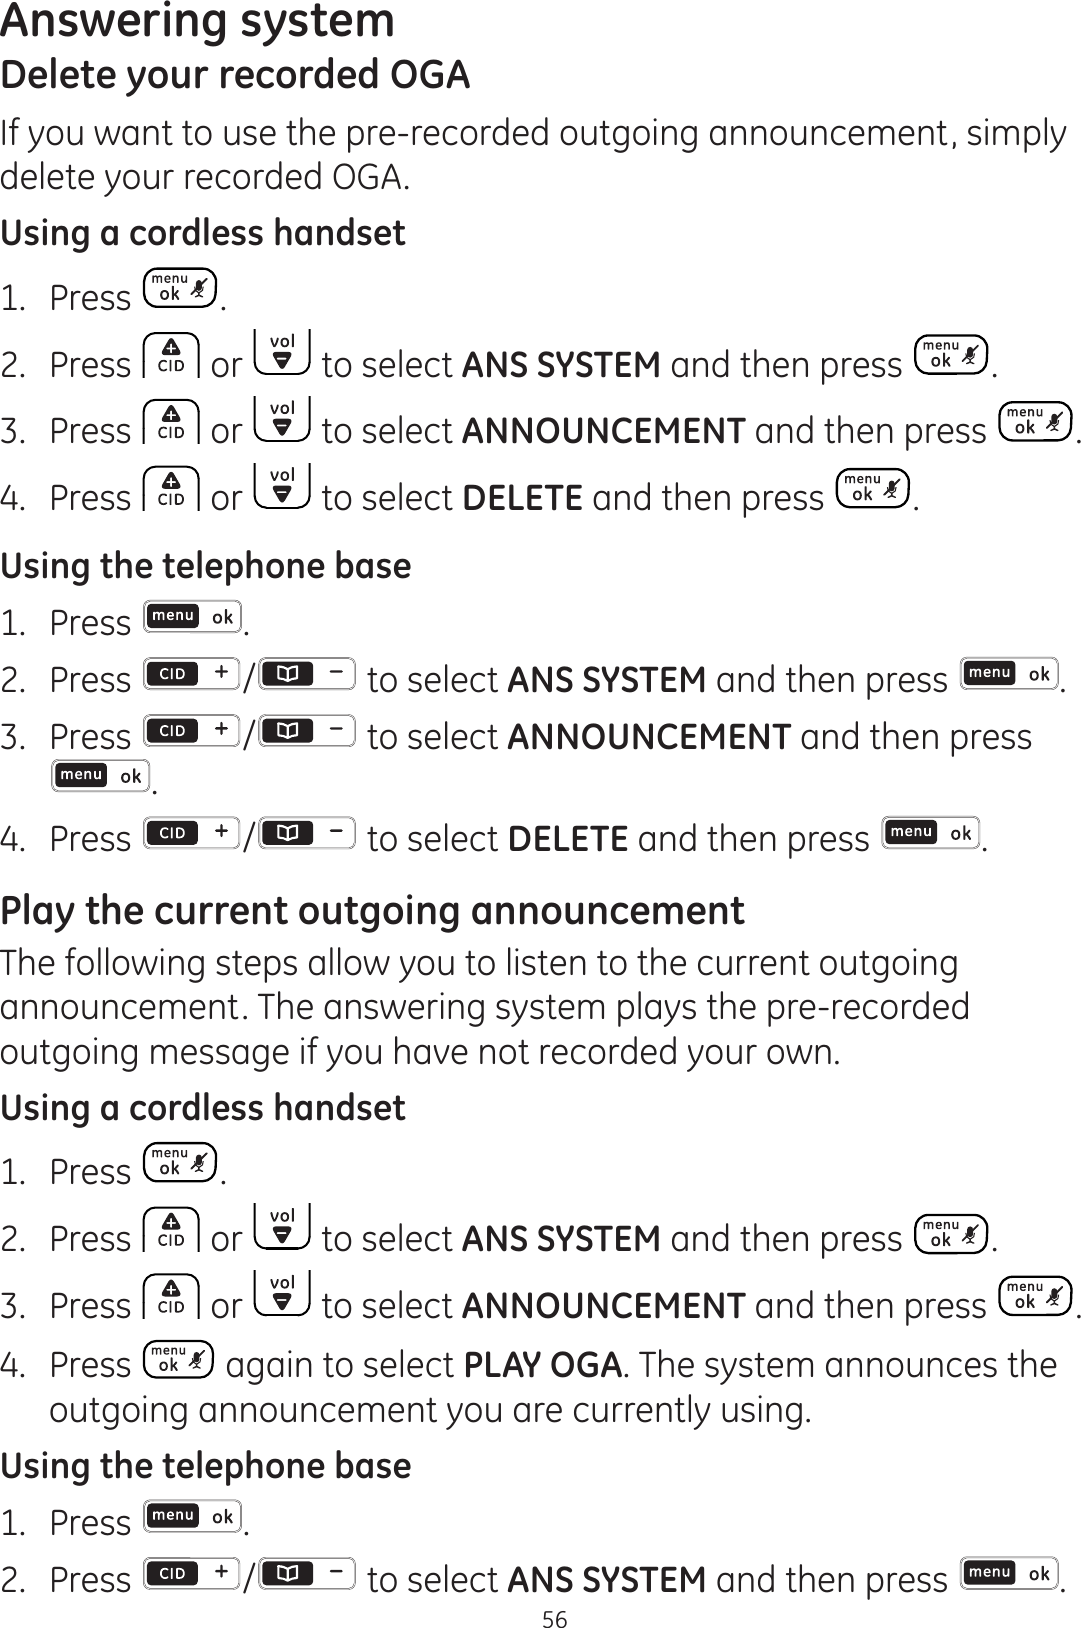 Answering system56Delete your recorded OGAIf you want to use the pre-recorded outgoing announcement, simply delete your recorded OGA.Using a cordless handset1.  Press .2.  Press   or   to select ANS SYSTEM and then press  .3.  Press   or   to select ANNOUNCEMENT and then press  .4.  Press   or   to select DELETE and then press  .Using the telephone base1.  Press  .2.  Press  / to select ANS SYSTEM and then press  .3.  Press  /  to select ANNOUNCEMENT and then press .4.  Press  / to select DELETE and then press  .Play the current outgoing announcementThe following steps allow you to listen to the current outgoing announcement. The answering system plays the pre-recorded outgoing message if you have not recorded your own. Using a cordless handset1.  Press  .2.  Press   or   to select ANS SYSTEM and then press  .3.  Press   or   to select ANNOUNCEMENT and then press  .4.  Press   again to select PLAY OGA. The system announces the outgoing announcement you are currently using. Using the telephone base1.  Press  .2.  Press  /  to select ANS SYSTEM and then press  .